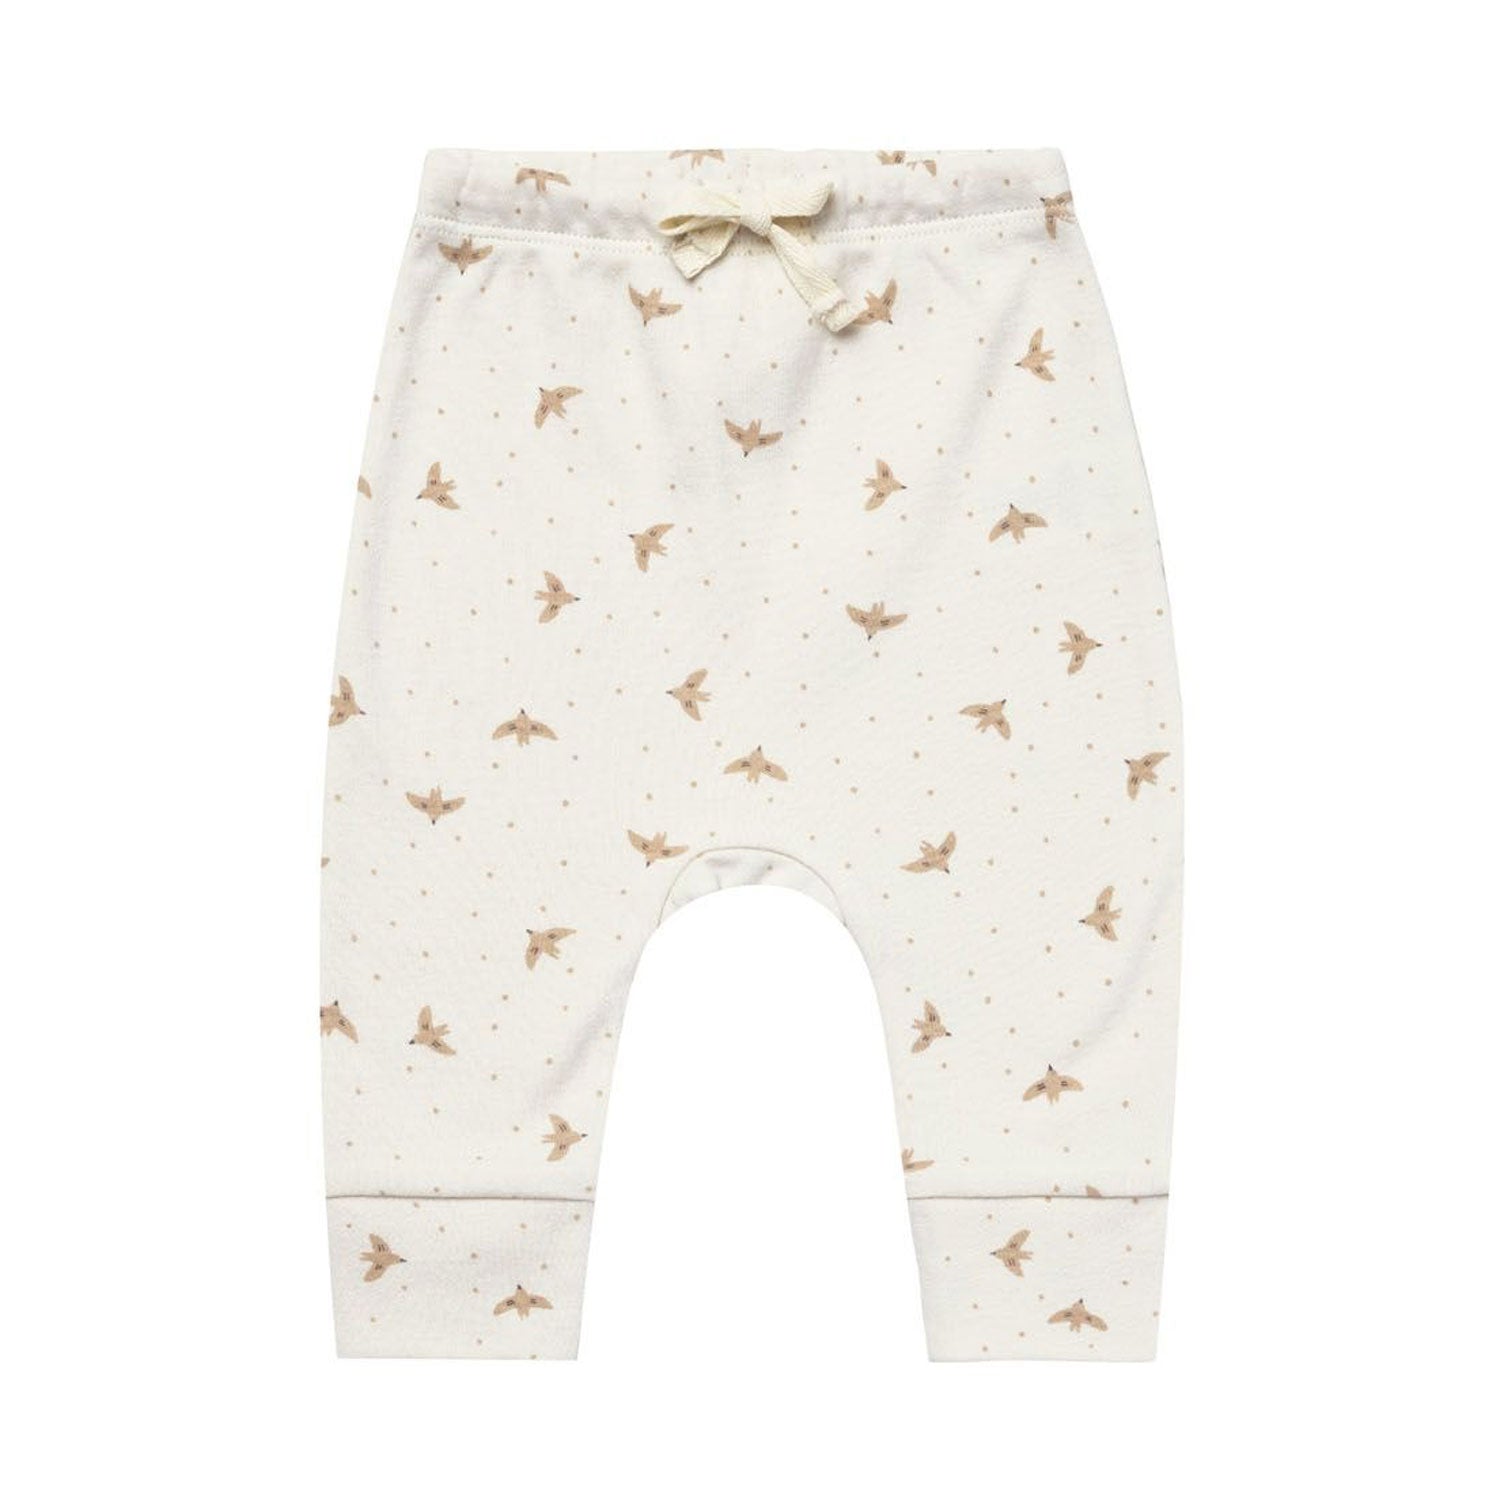 Quincy Mae Drawstring Pant - Doves - Ivory